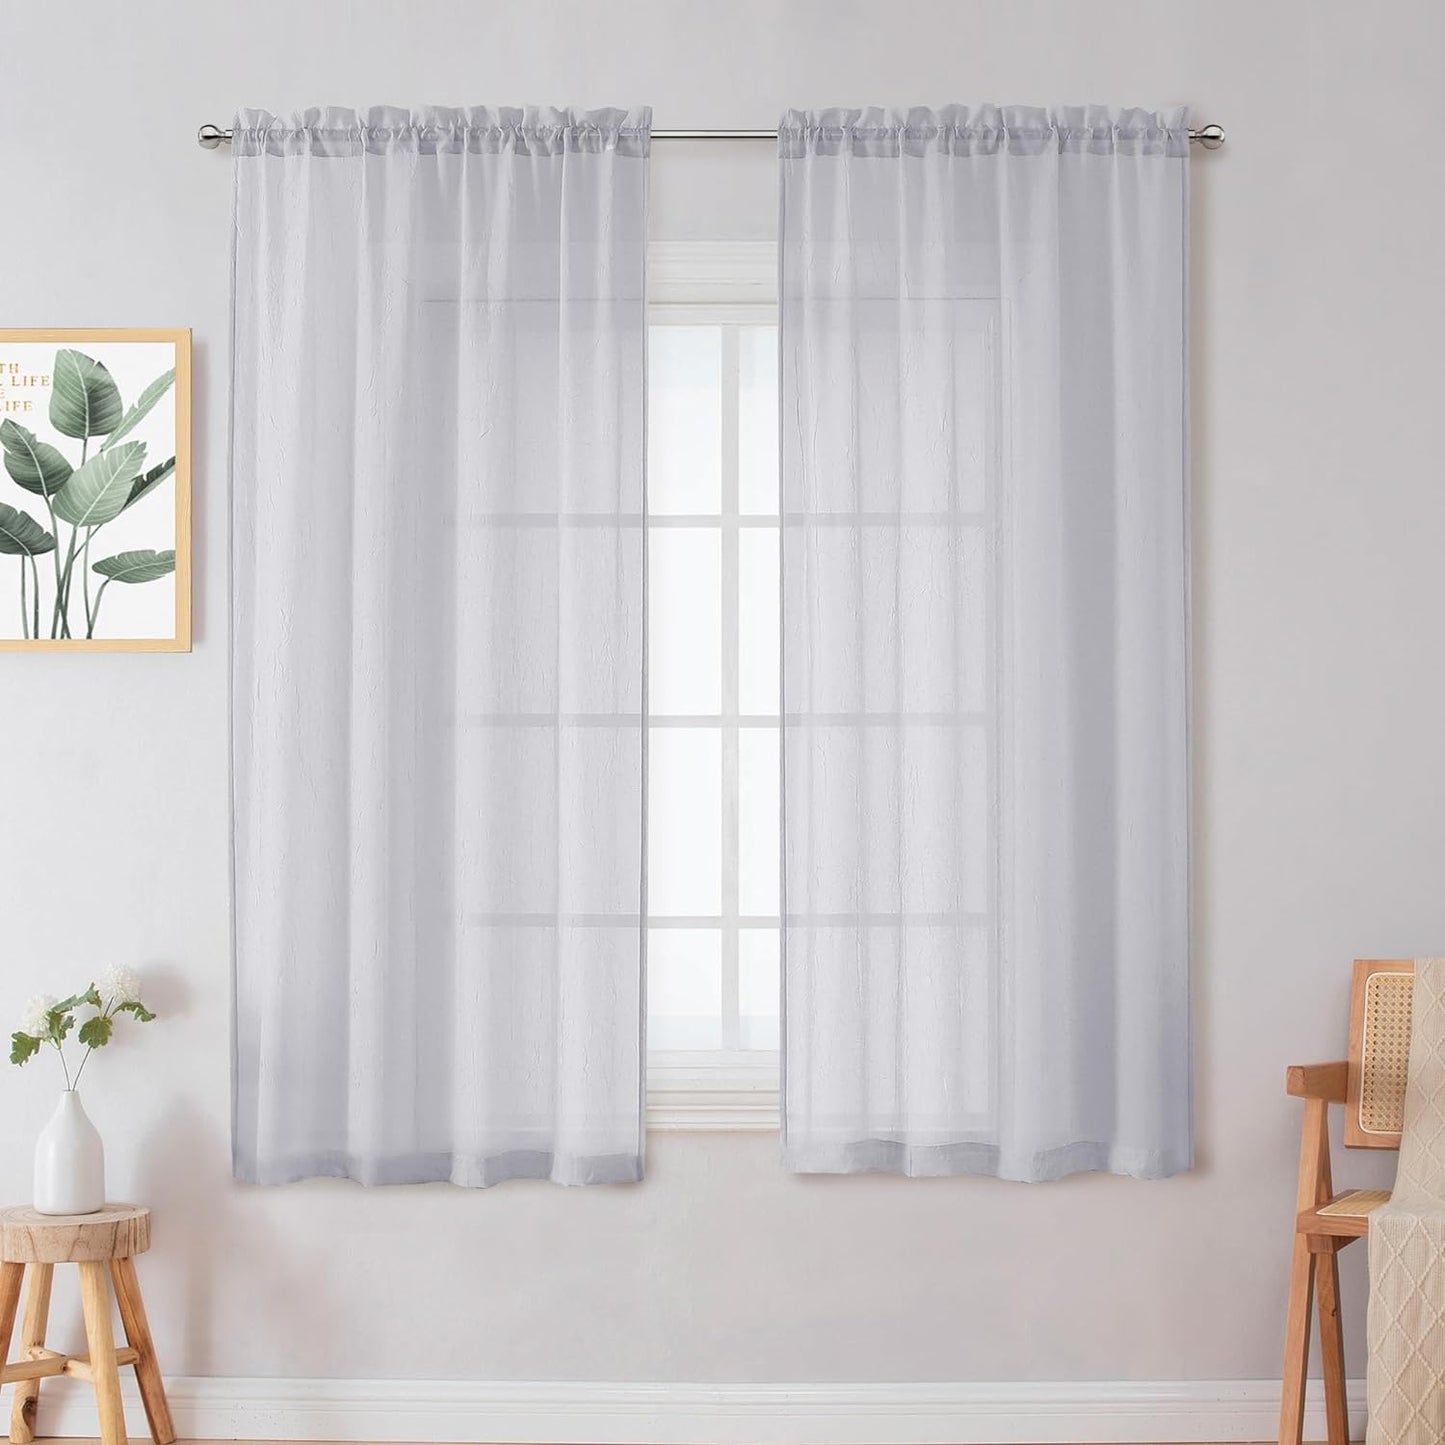 Crushed Sheer White Curtains 63 Inch Length 2 Panels, Light Filtering Solid Crinkle Voile Short Sheer Curtian for Bedroom Living Room, Each 42Wx63L Inches  Chyhomenyc Light Grey 42 W X 63 L 